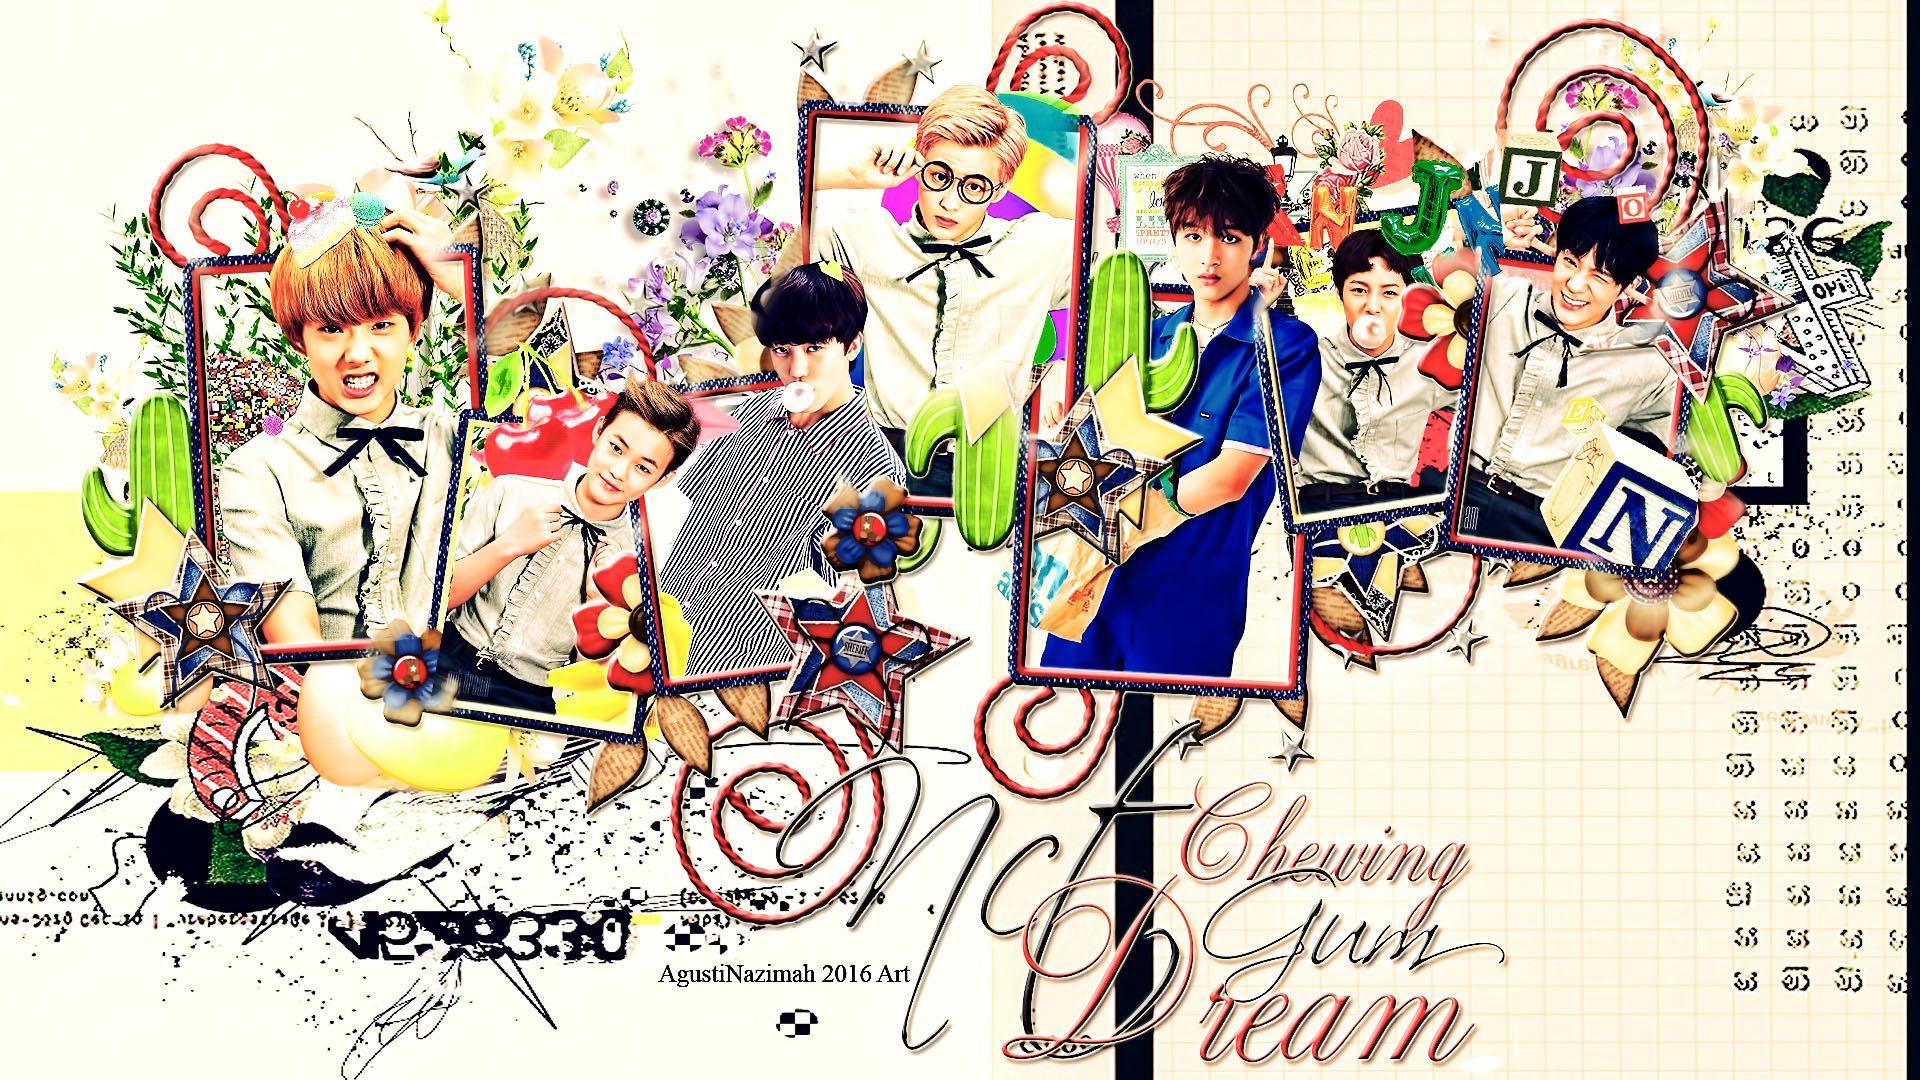 Artwork NCT Dream For Chewing Gum. ♥ AgustiNazimah Experience ♥